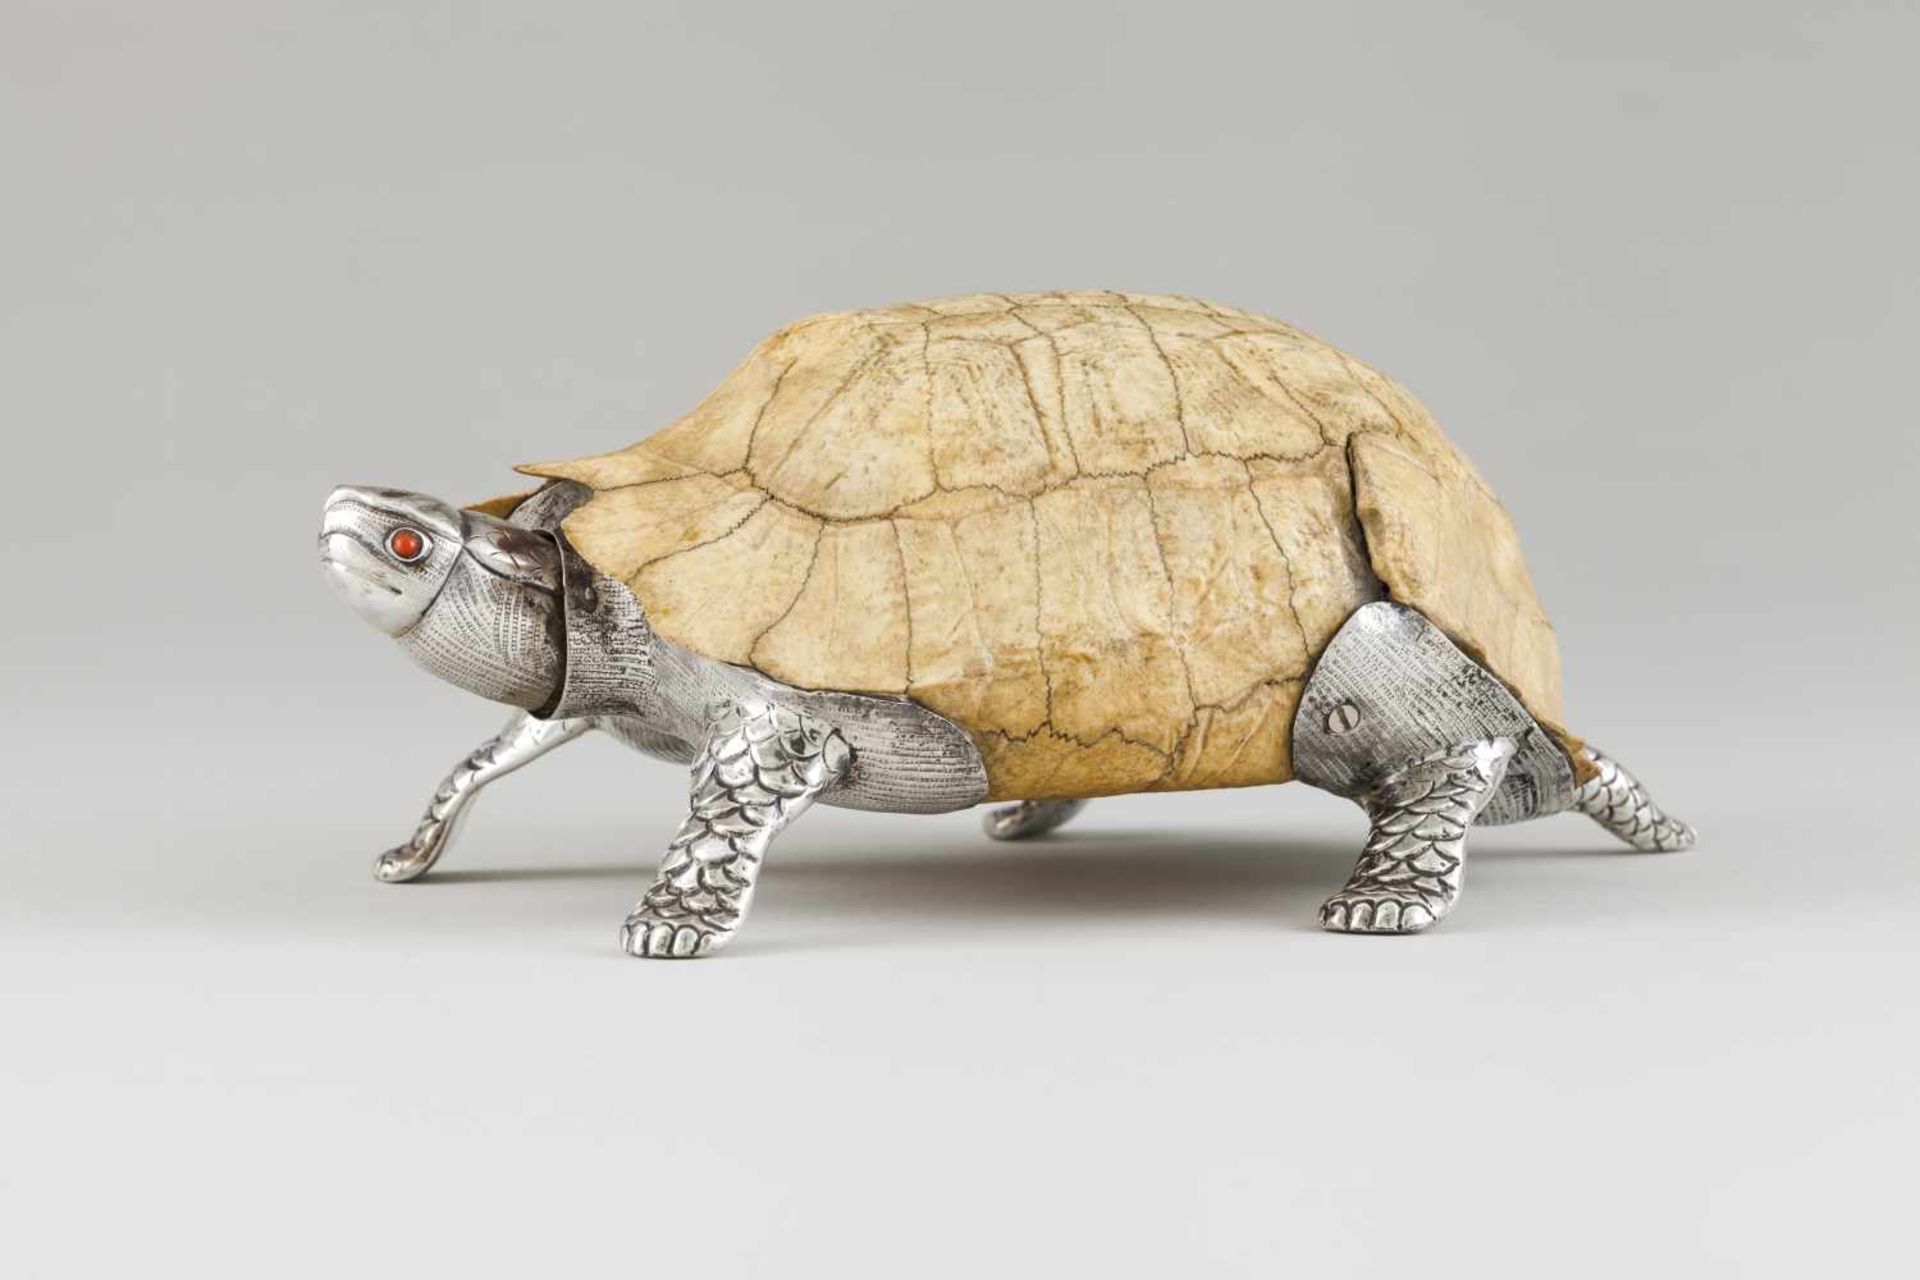 A Luiz Ferreira tortoiseEngraved and chiselled silver and tortoiseshellMoving head and tail